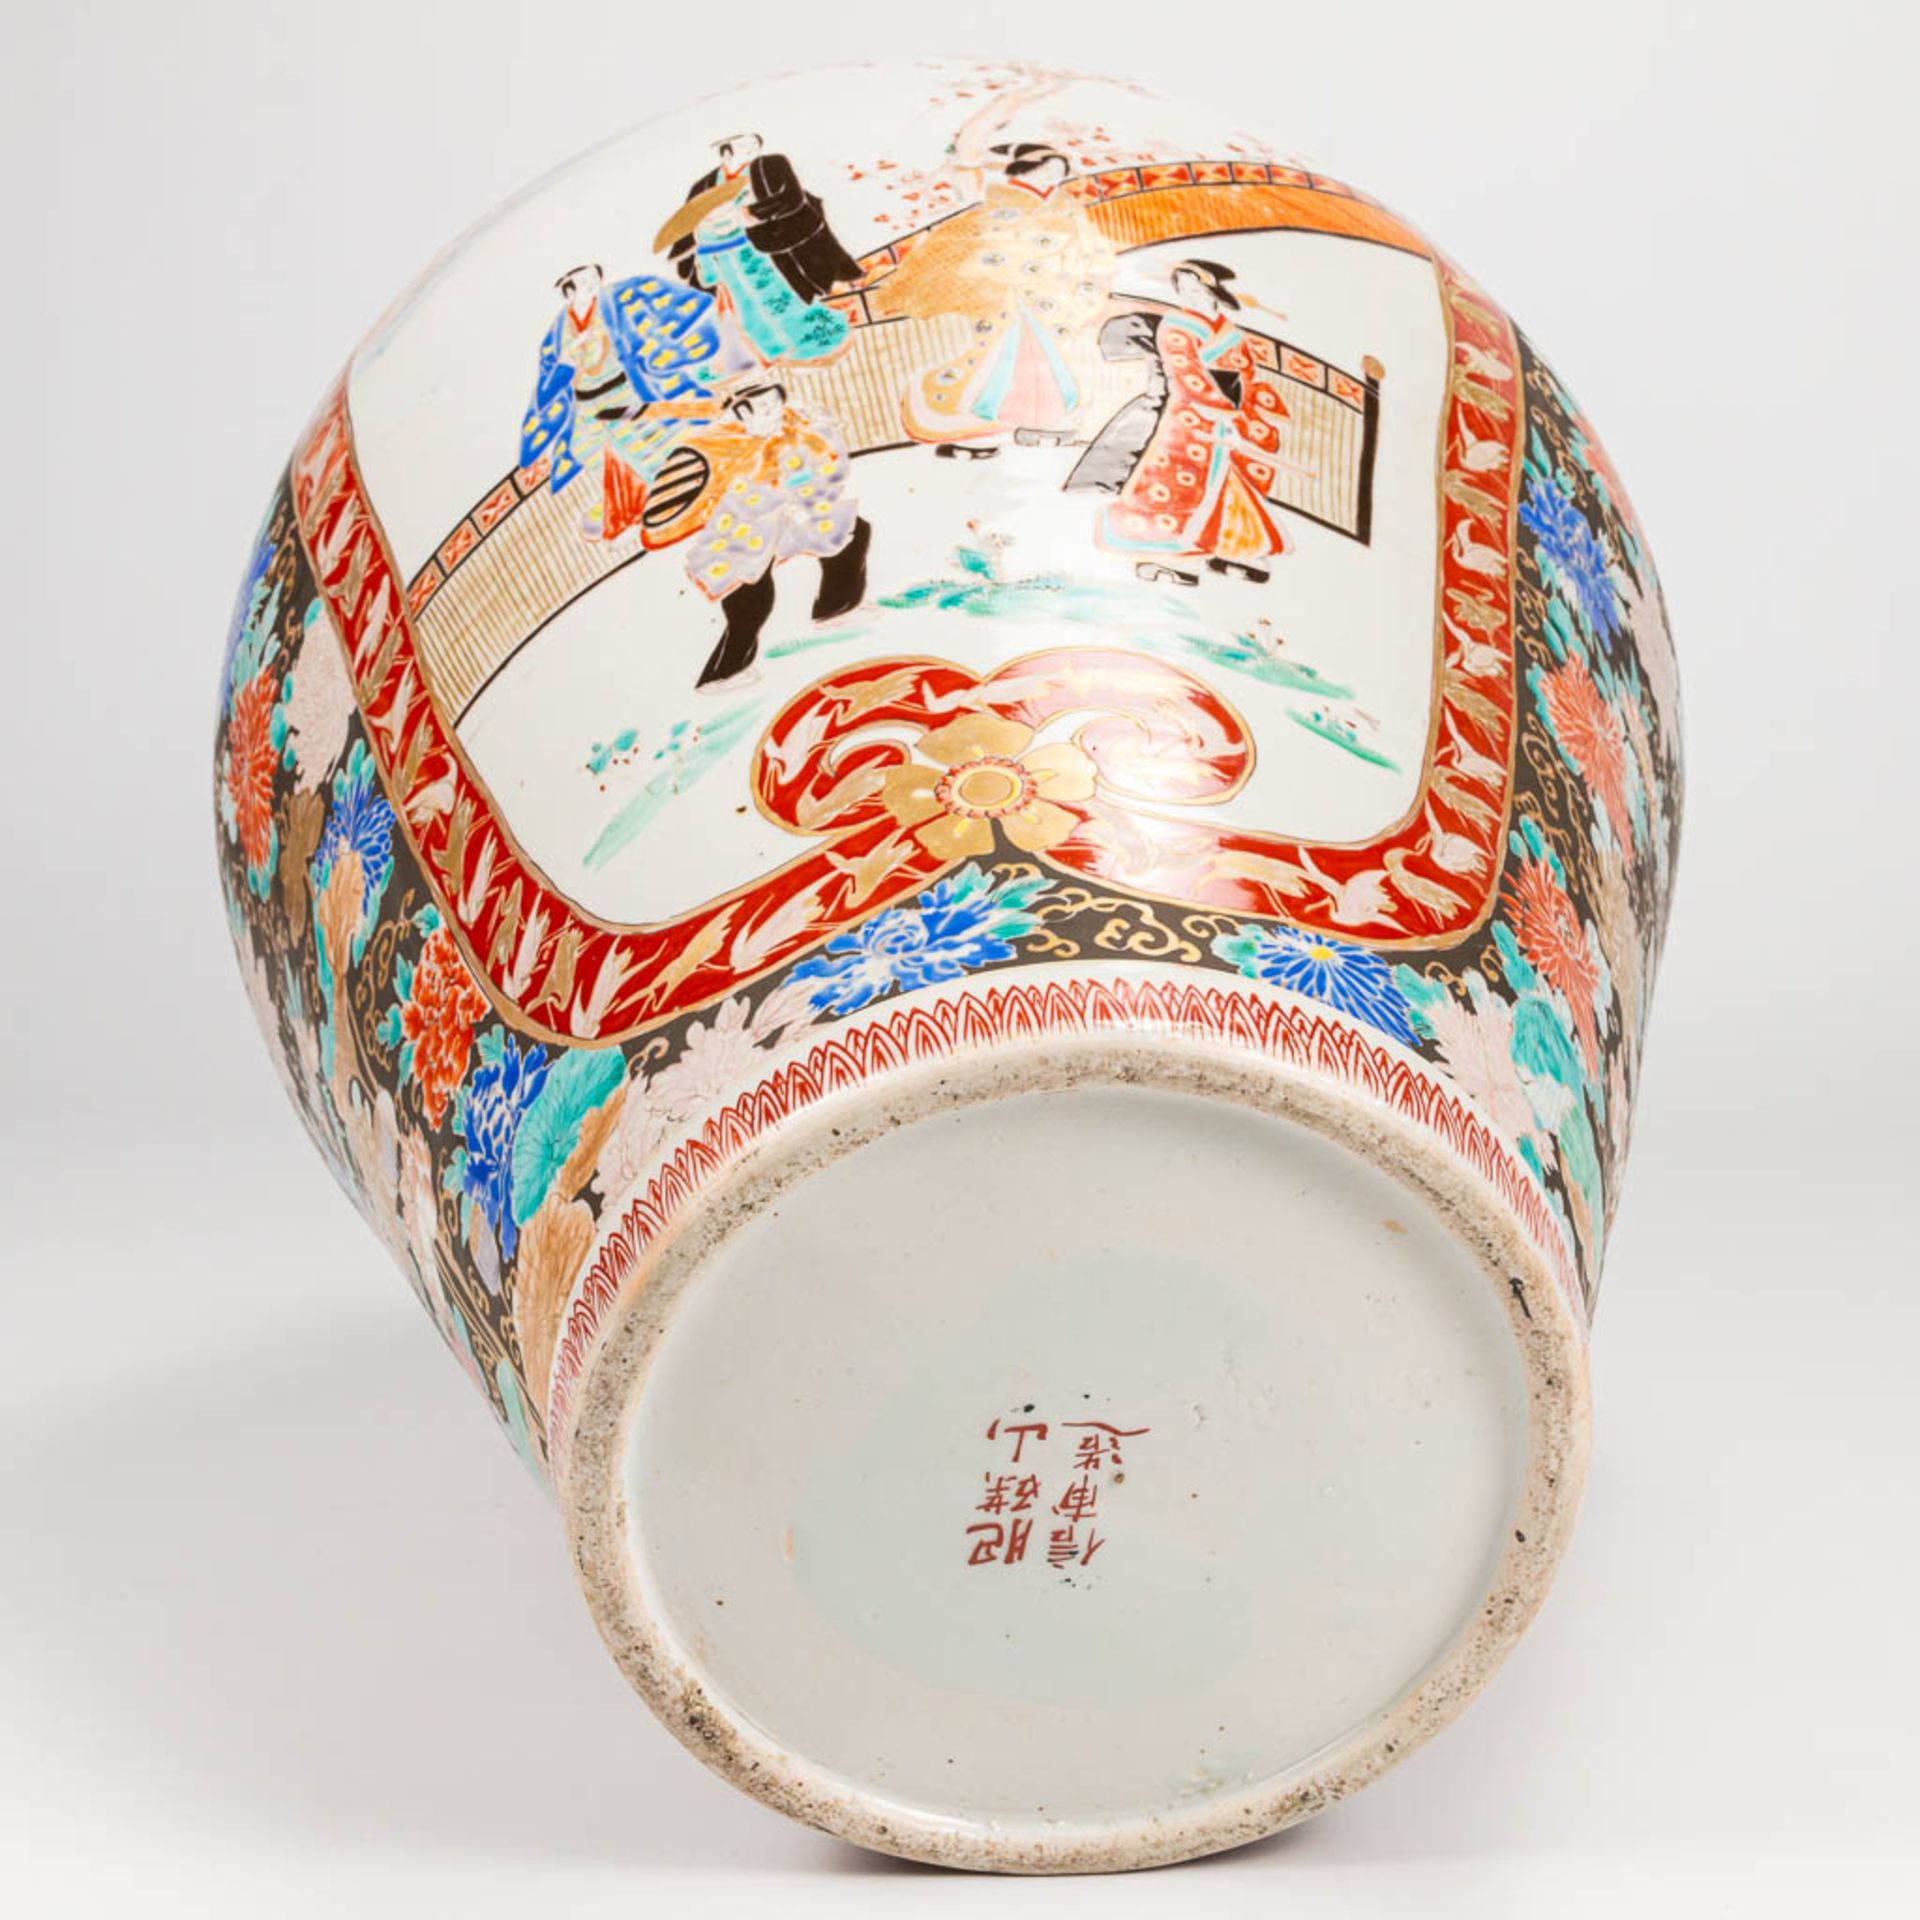 A large Imari display vase made of hand-painted porcelain in Japan. 19th/20th century. (60 x 42 cm) - Image 4 of 21